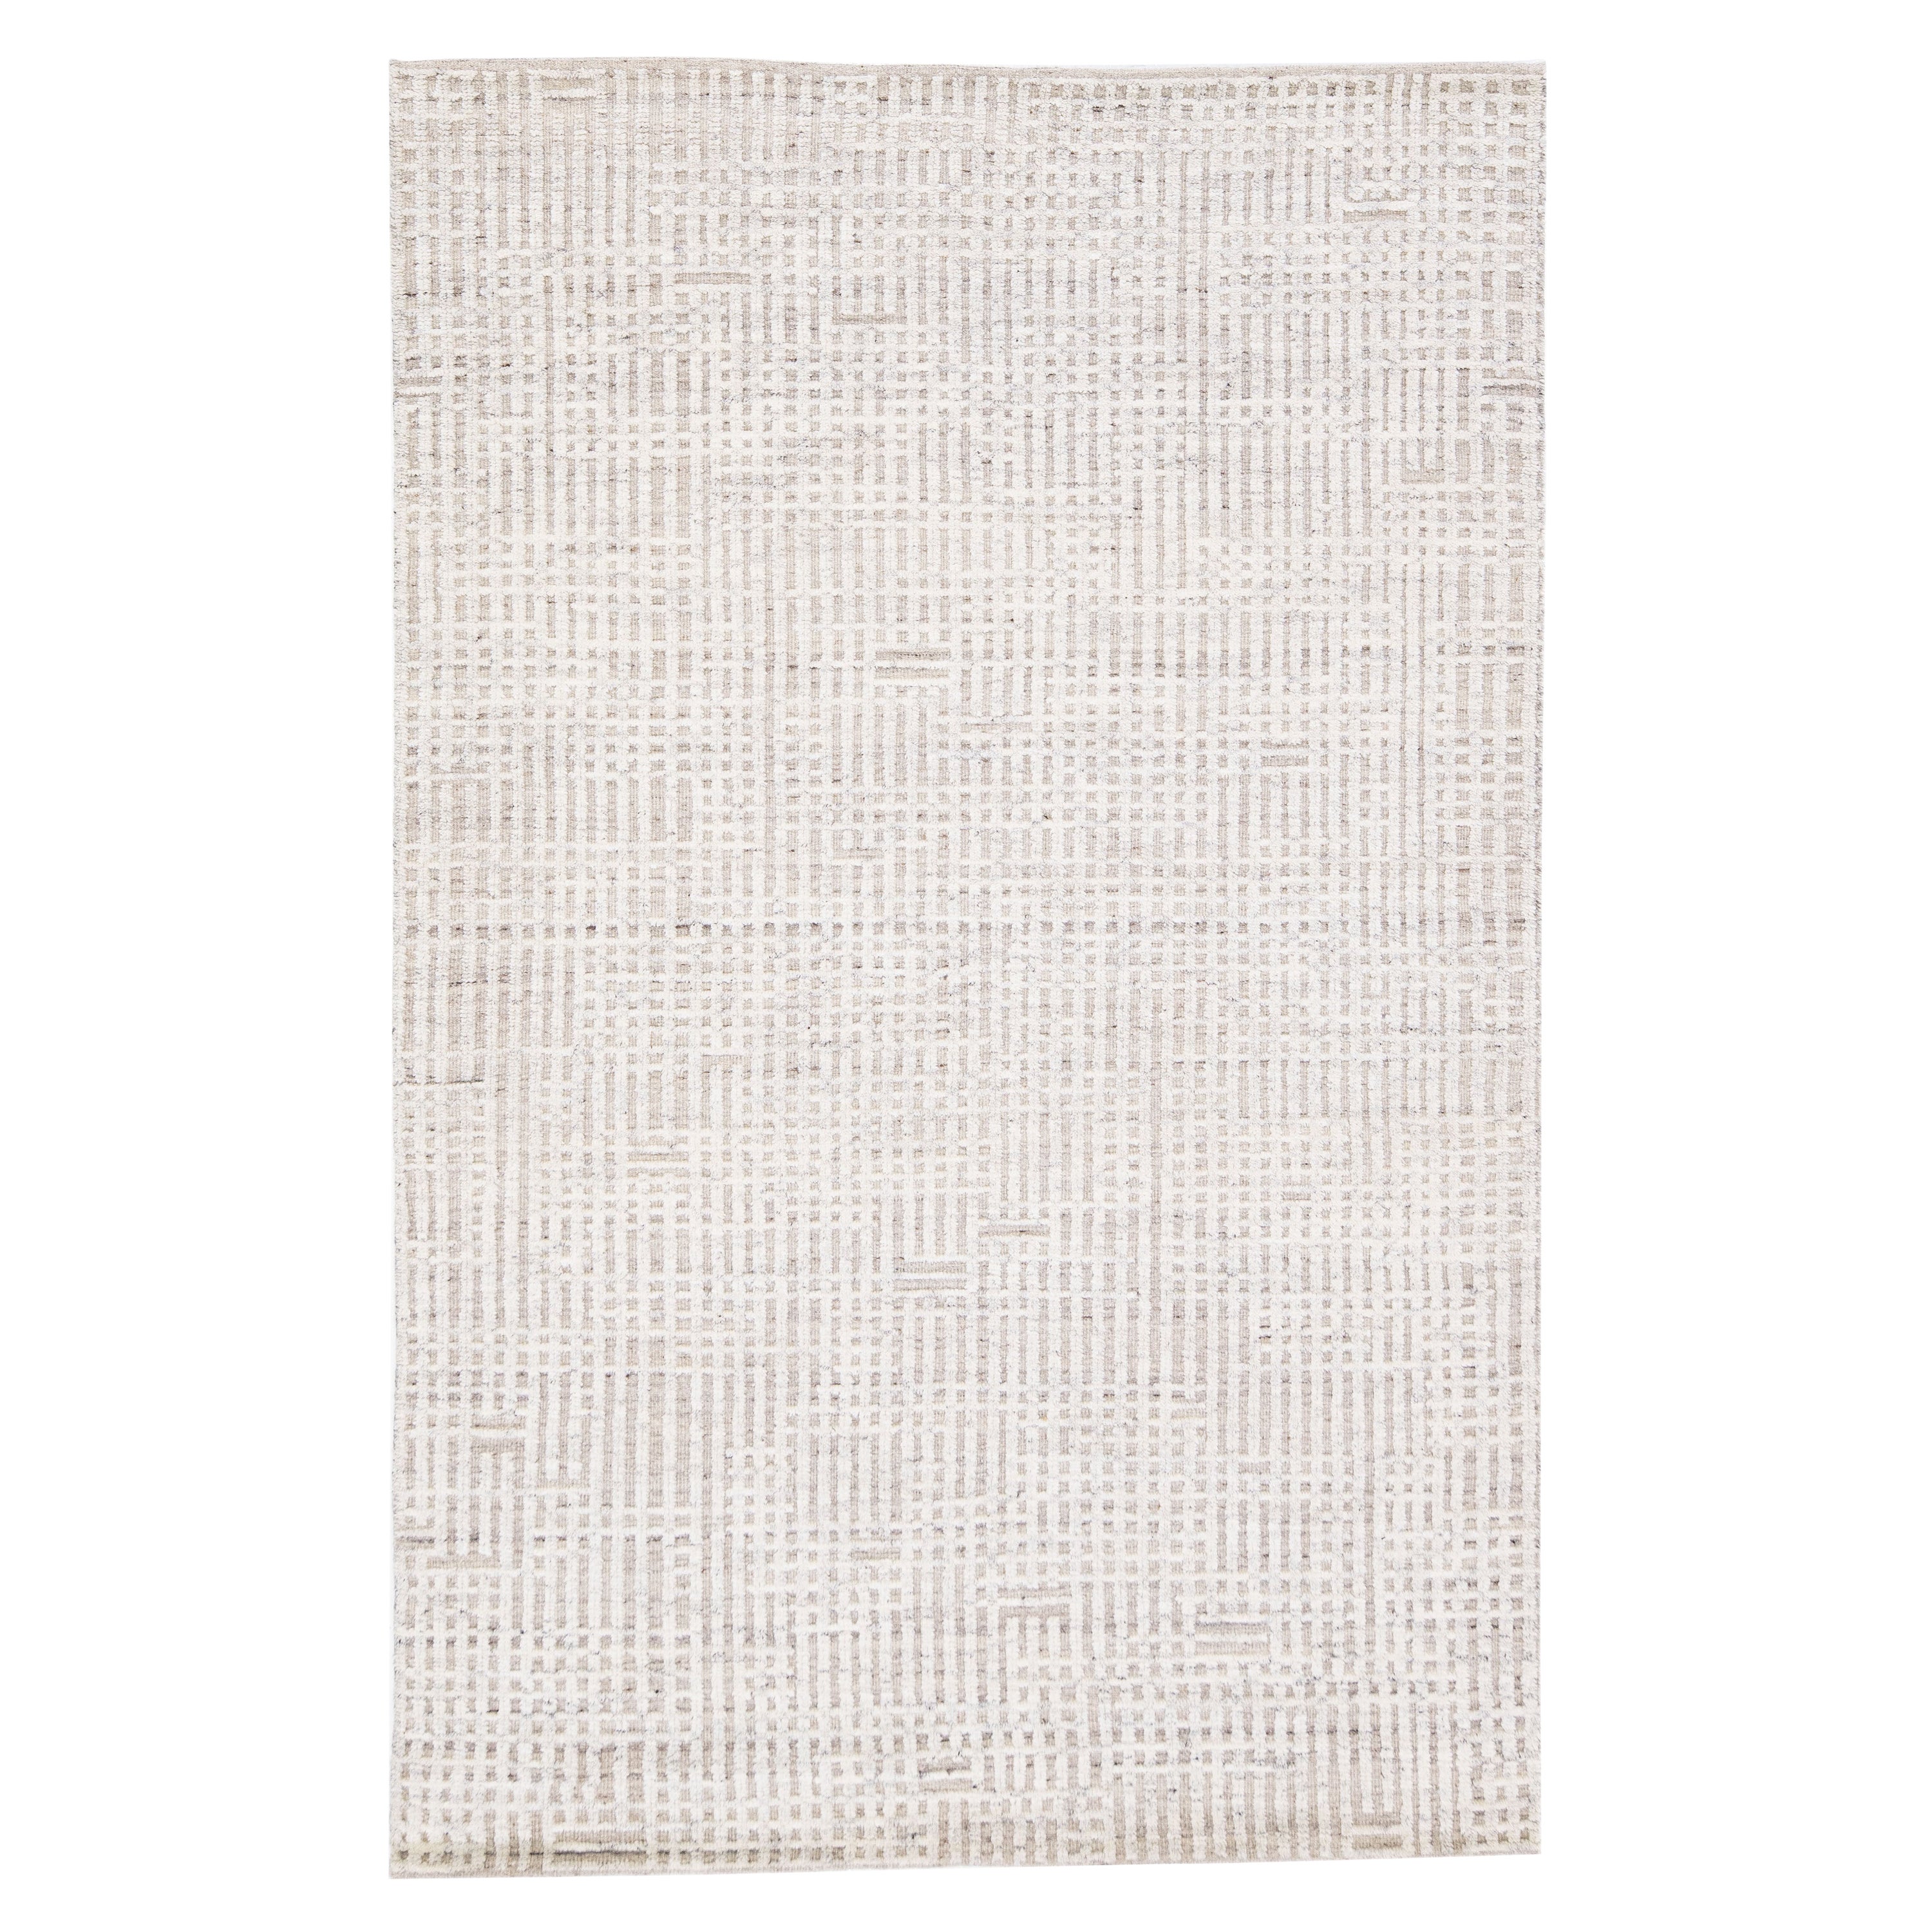 Modern Geometric Moroccan Style Scatter Wool Rug with Ivory Field by Apadana